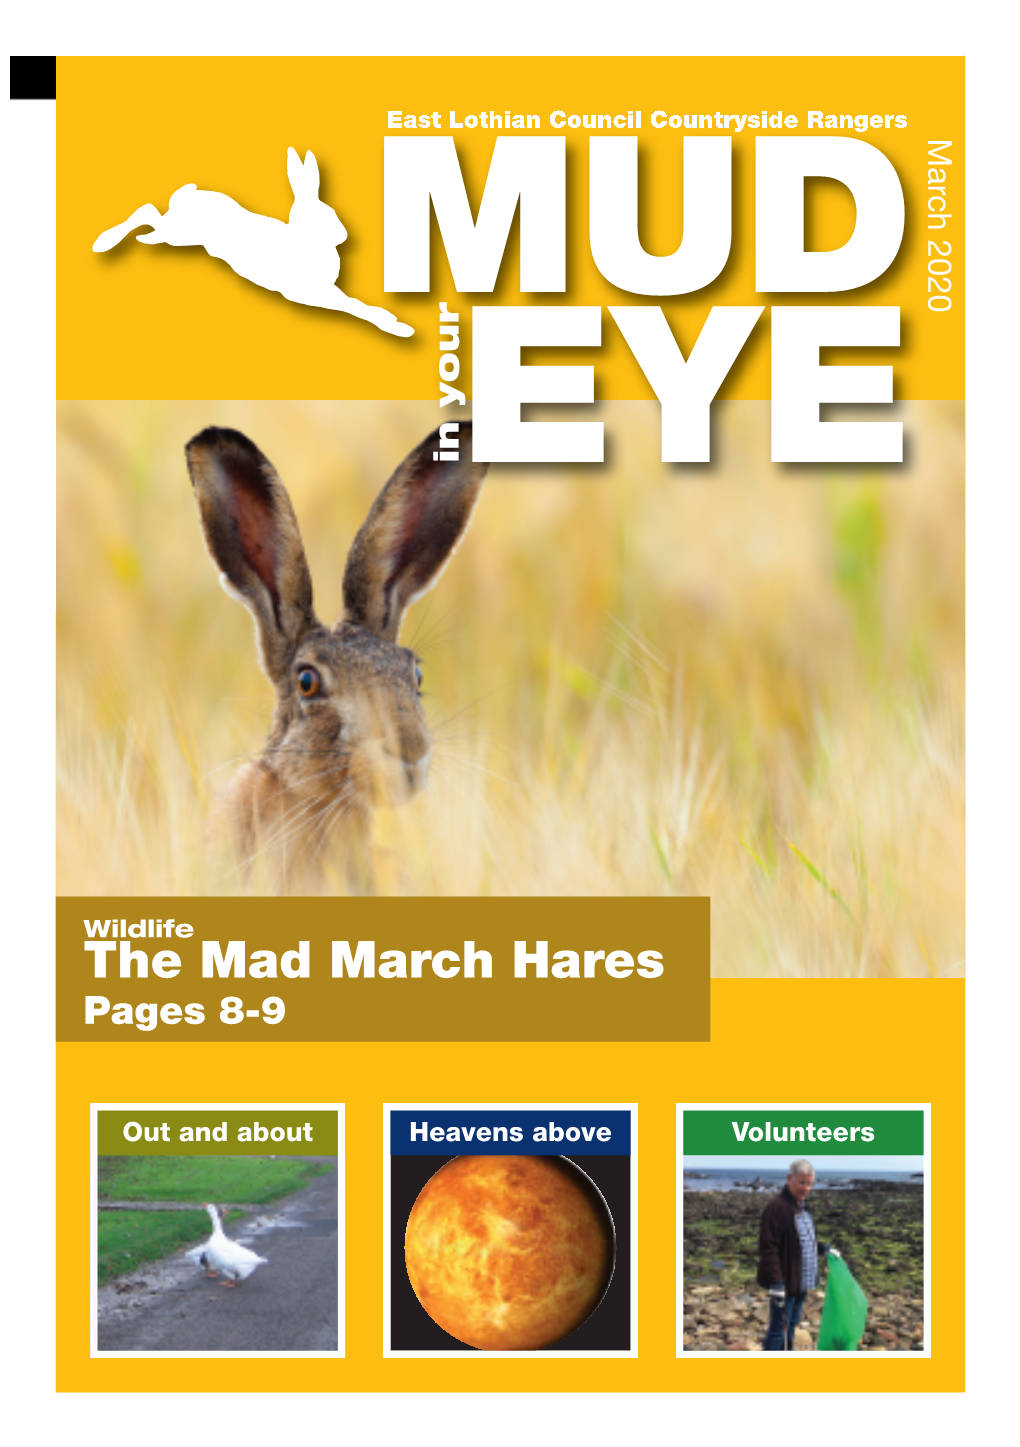 The Mad March Hares Pages 8-9